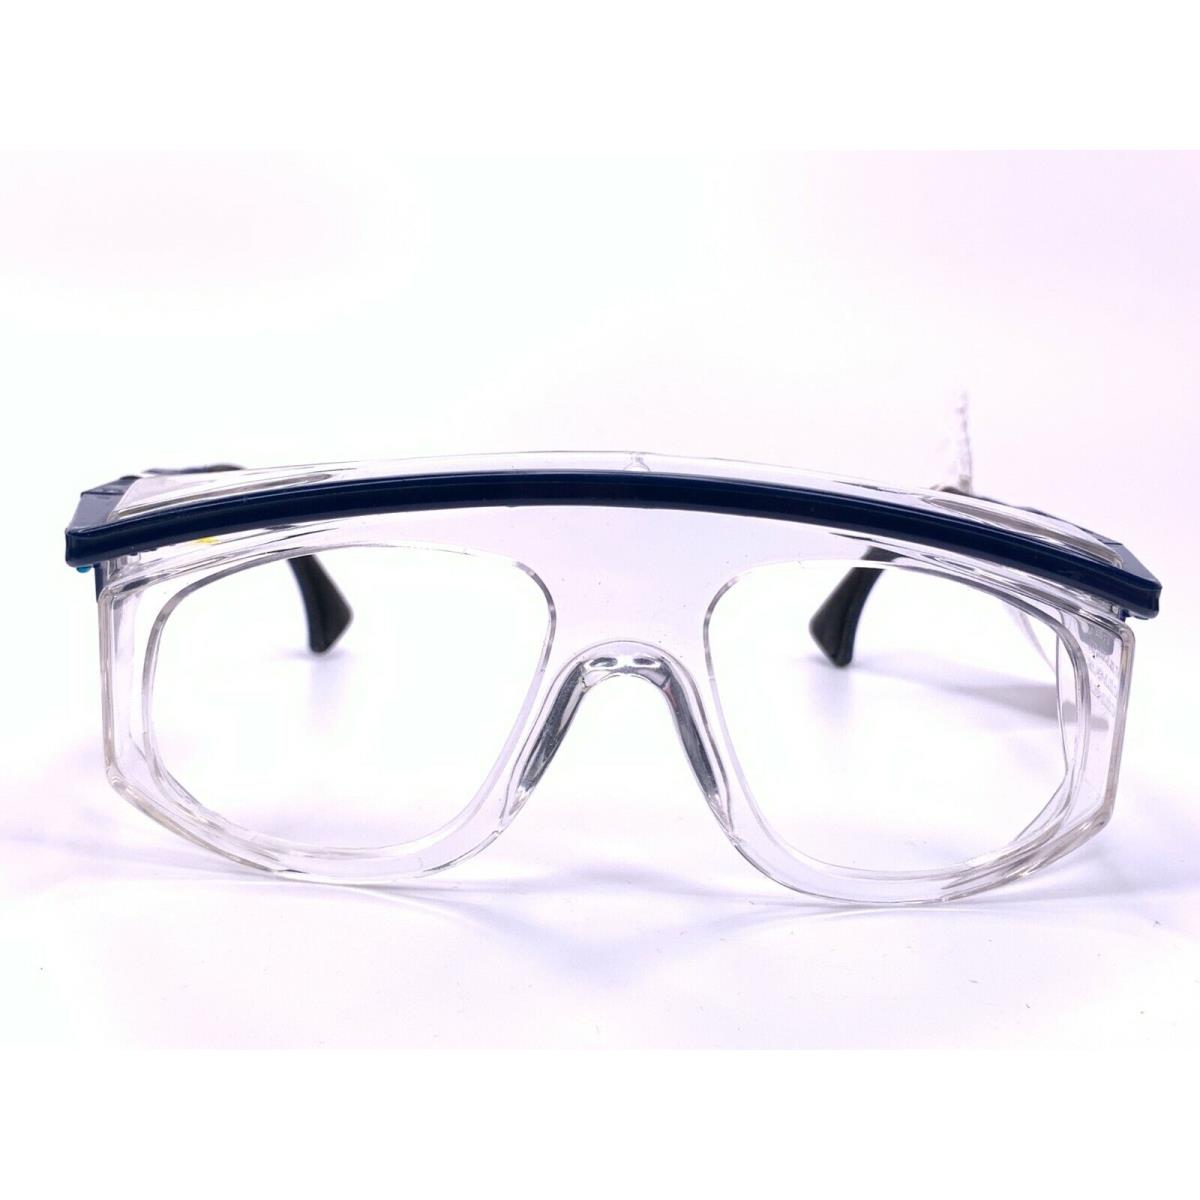 Uvex Z87 Astro 3003-L1 Blue Clear Safety Goggles Glasses Frames 54-20-130 A1